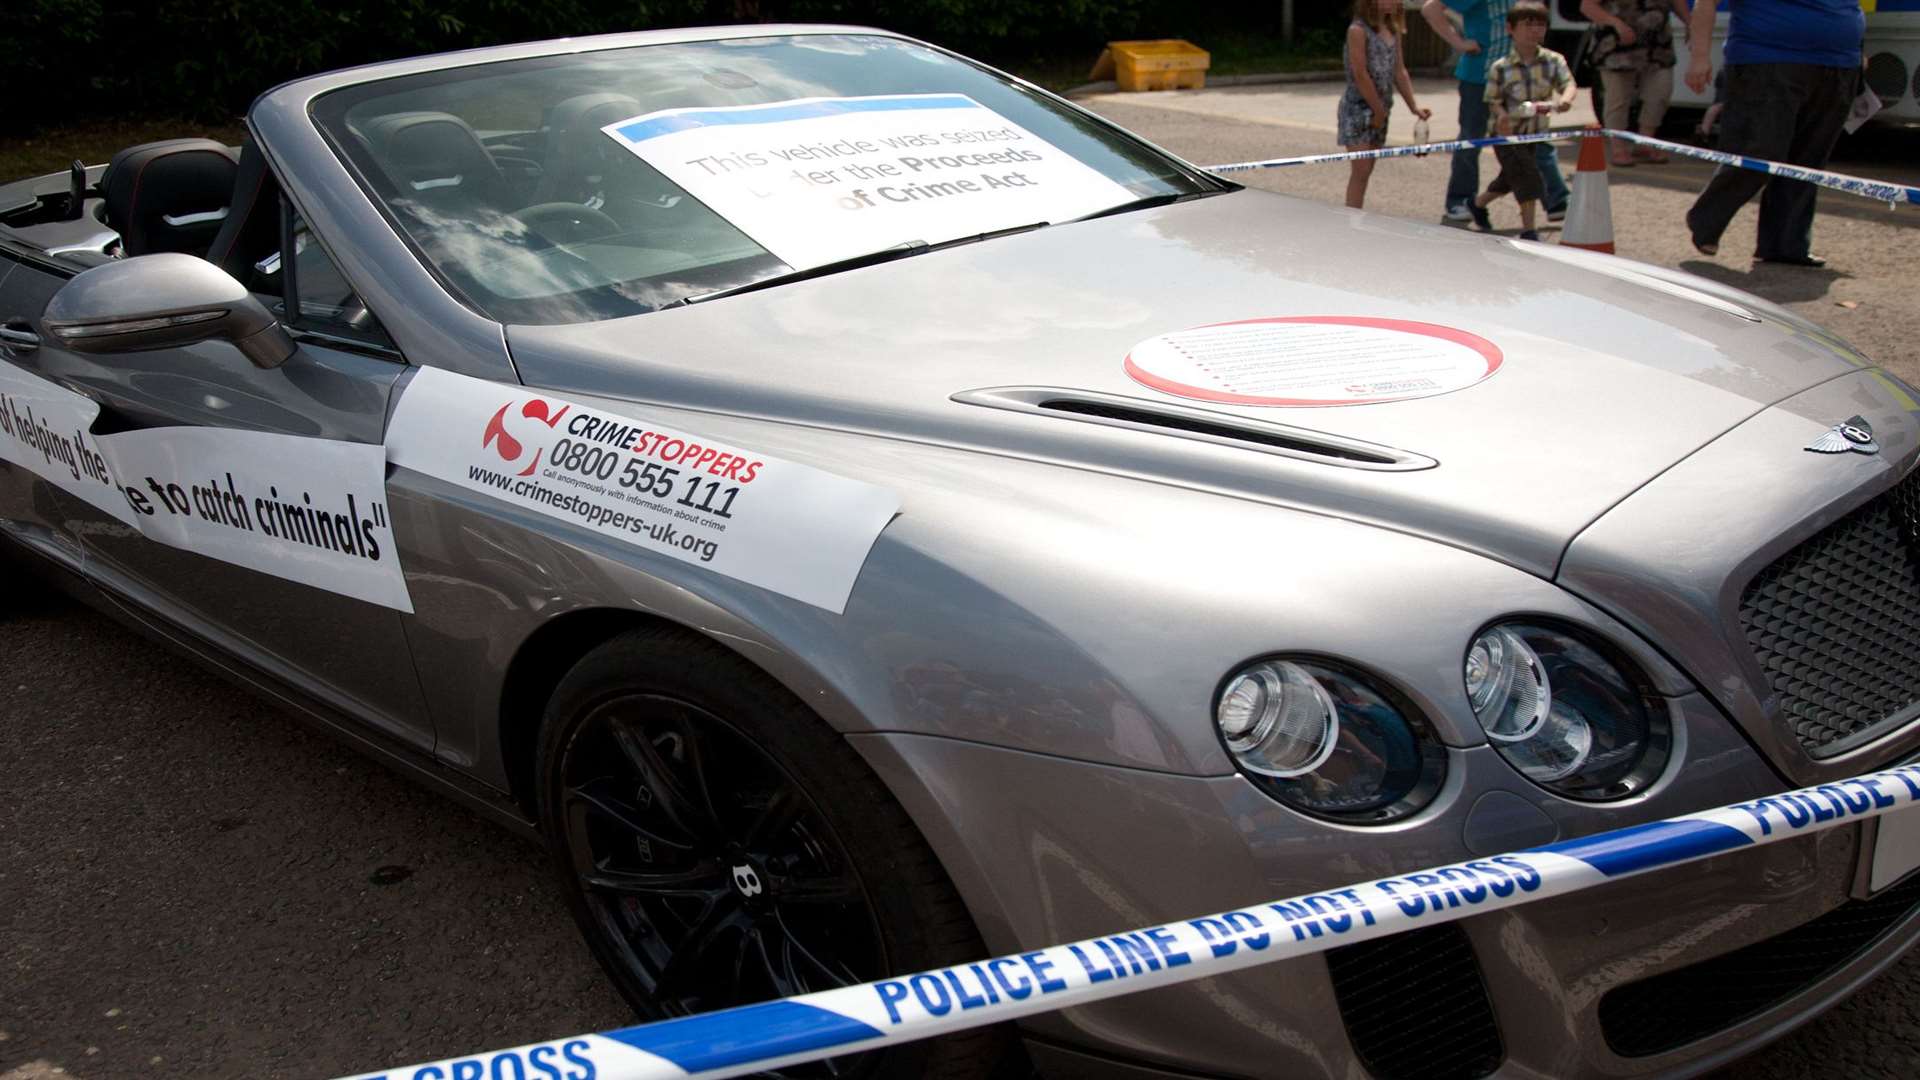 A Bentley owned by fraudster Dawn Simon seized under the Proceeds of Crime Act